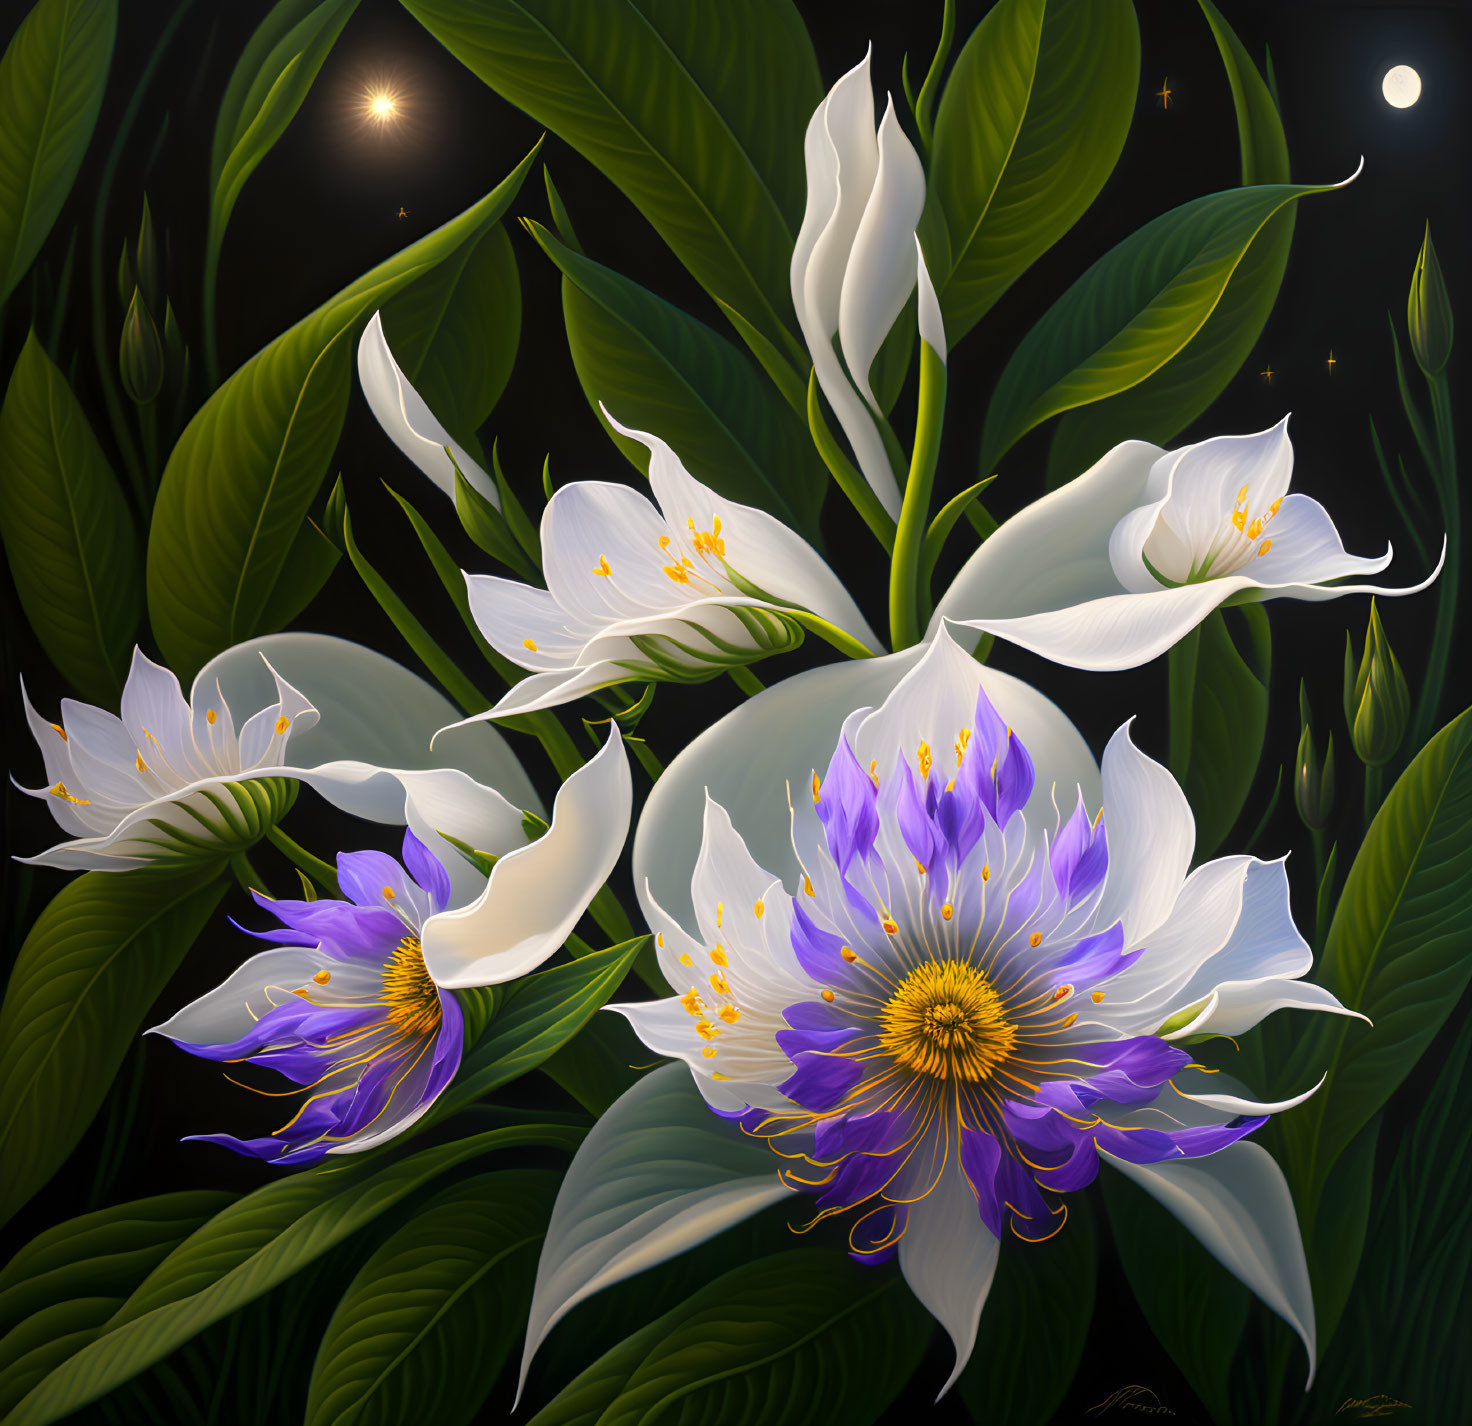 Moon and Flowers